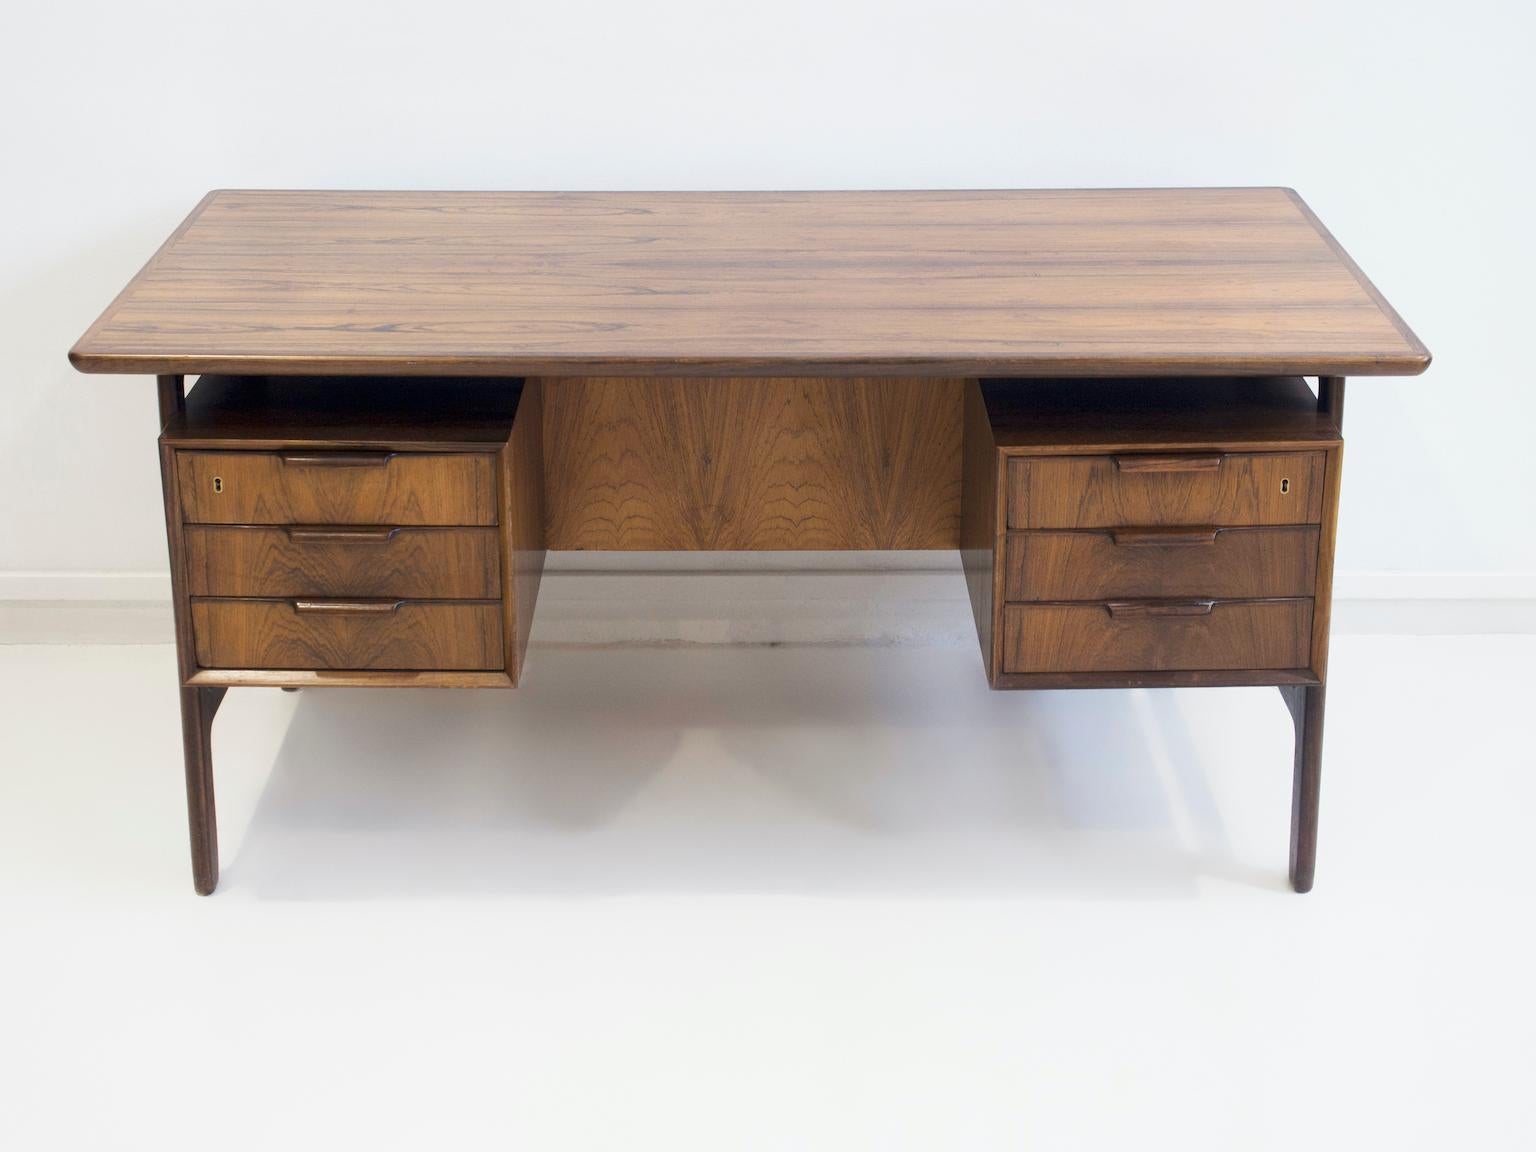 Writing desk, model 75, produced by Omann Juniors Furniture Factory. Front with six drawers, back with space for books and documents and a folding flap. Made of veneered hardwood.